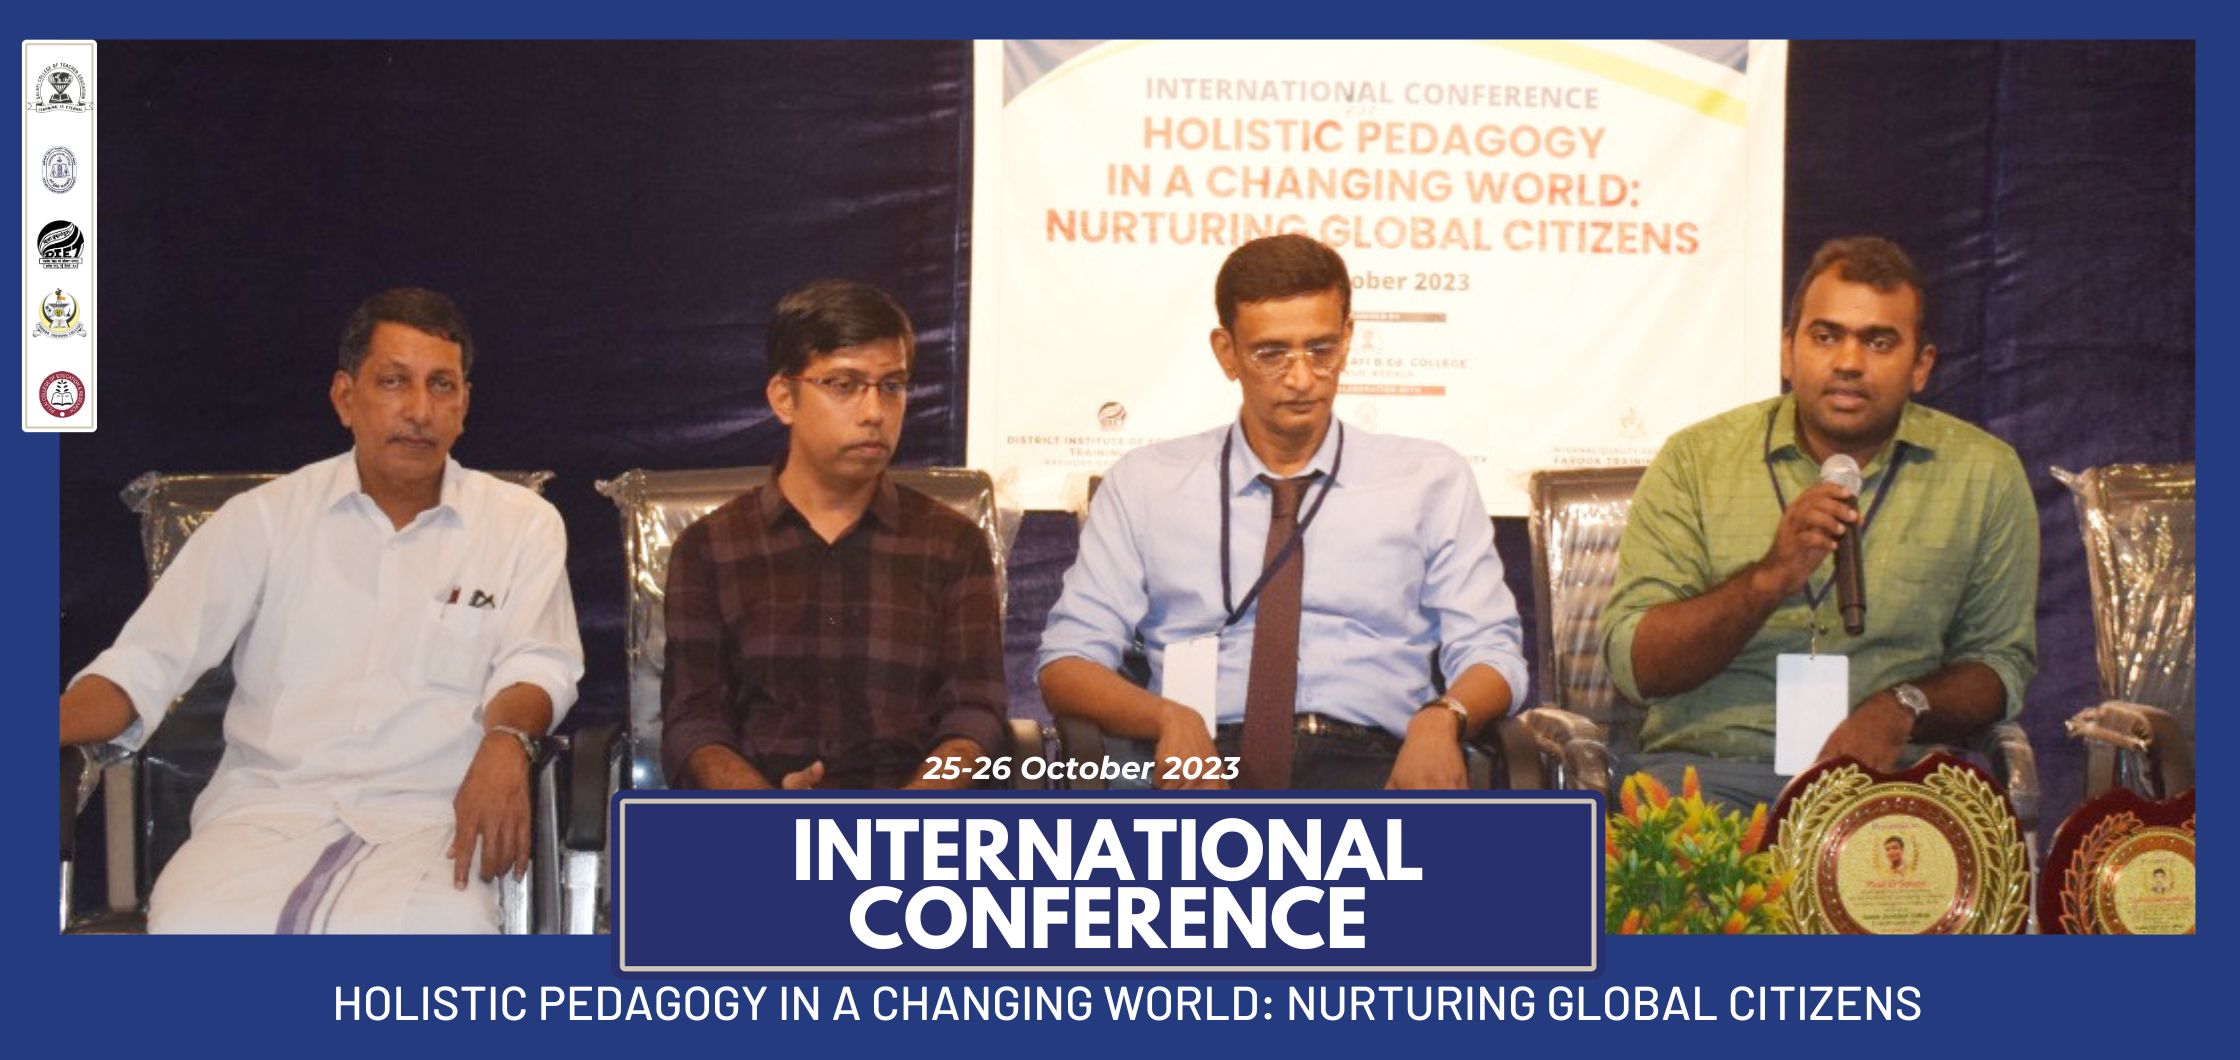 INTERNATIONAL CONFERENCE ON HOLISTIC PEDAGOGY IN A CHANGING WORLD: NURTURING GLOBAL CITIZENS